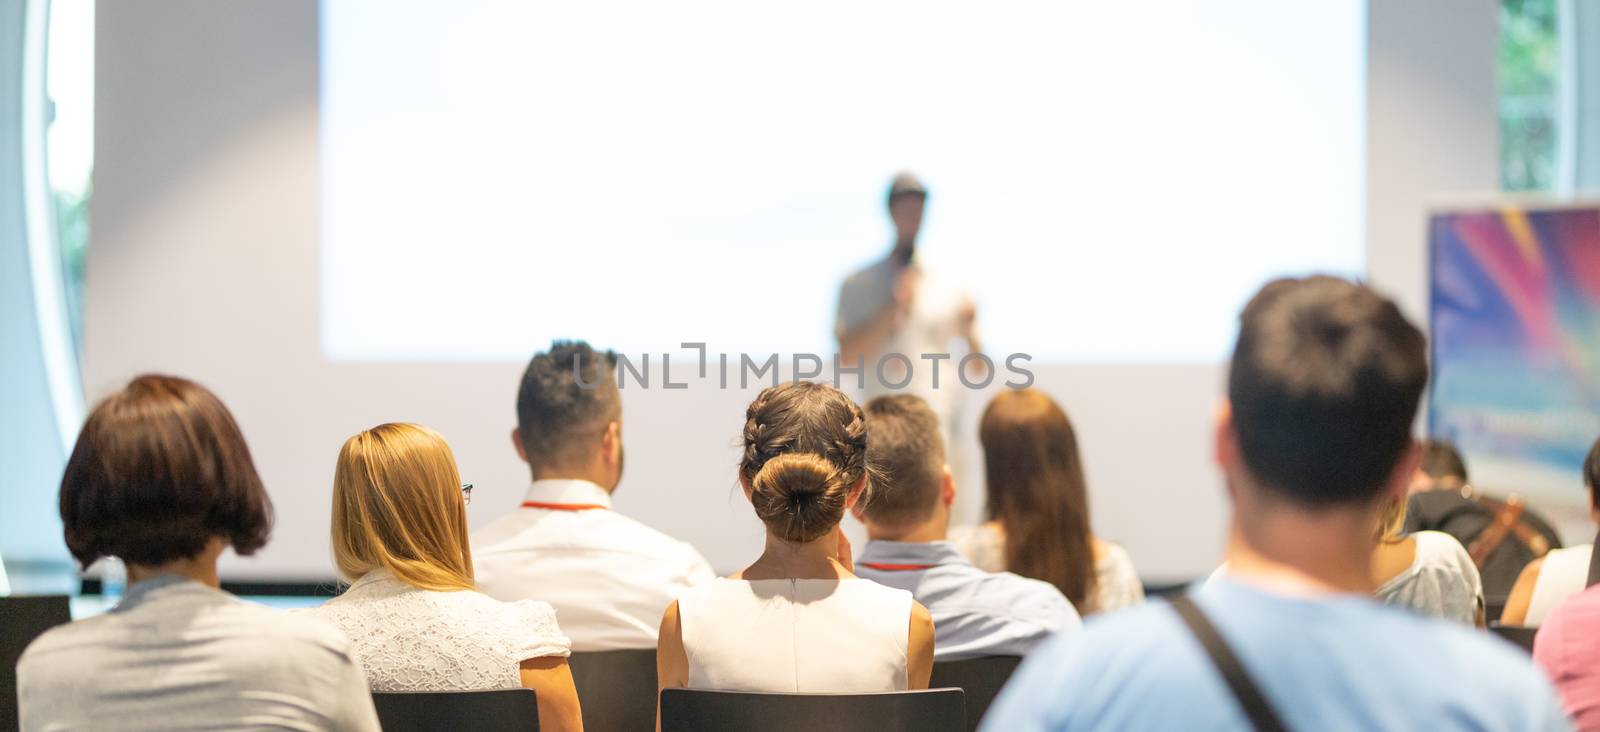 Male speaker giving a talk in conference hall at business event. Audience at the conference hall. Business and Entrepreneurship concept. Focus on unrecognizable people in audience.